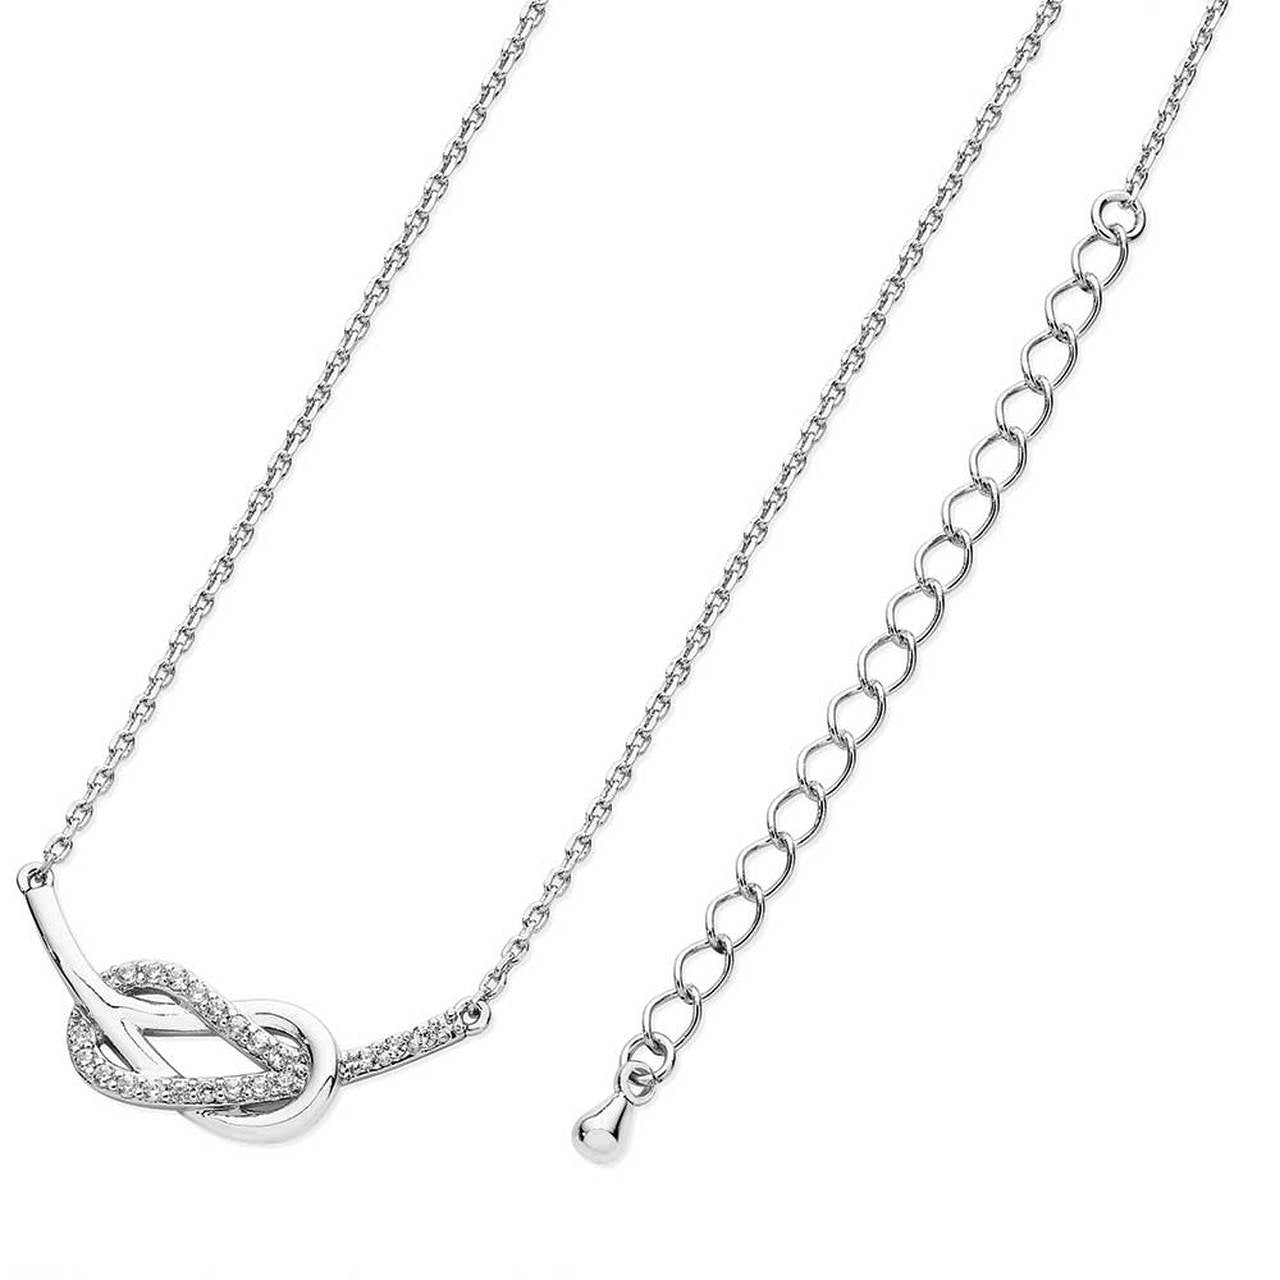 Tipperary Crystal Silver Double Swirl Hammock Pendant  Expertly crafted in precious silver, this dimensional look features two interlocking loops joined harmoniously resulting in a stylish hammock shaped design. The necklace features one sleek polished loop entwined with a second one completely lined with clear crystal accents. This unique eye-catching look captivates with it’s sparkle and brightly polished shine.